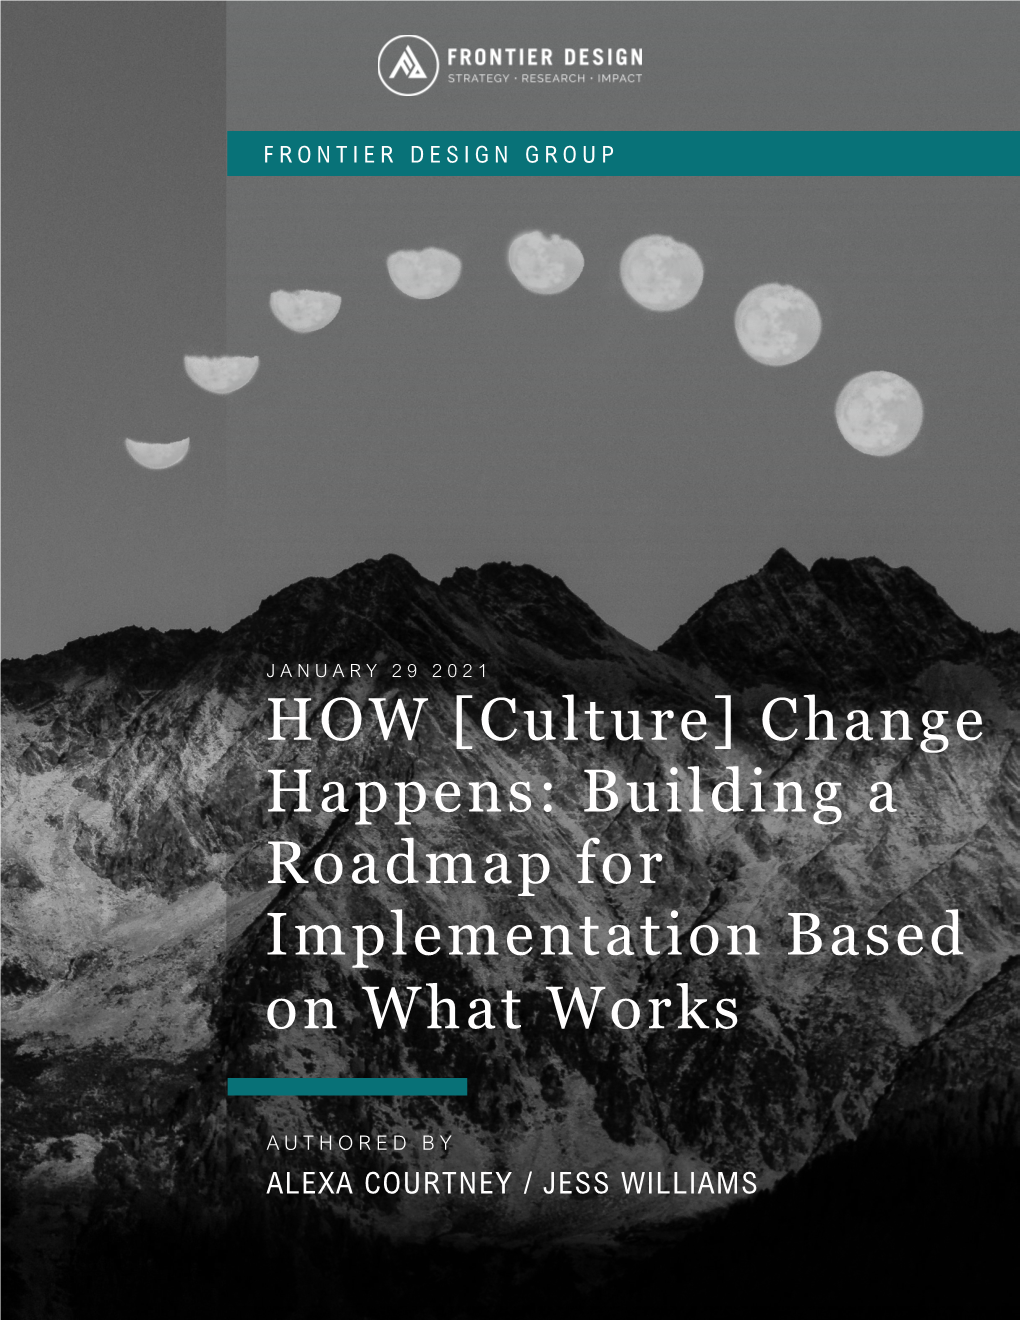 HOW [Culture] Change Happens: Building a Roadmap for Implementation Based on What Works